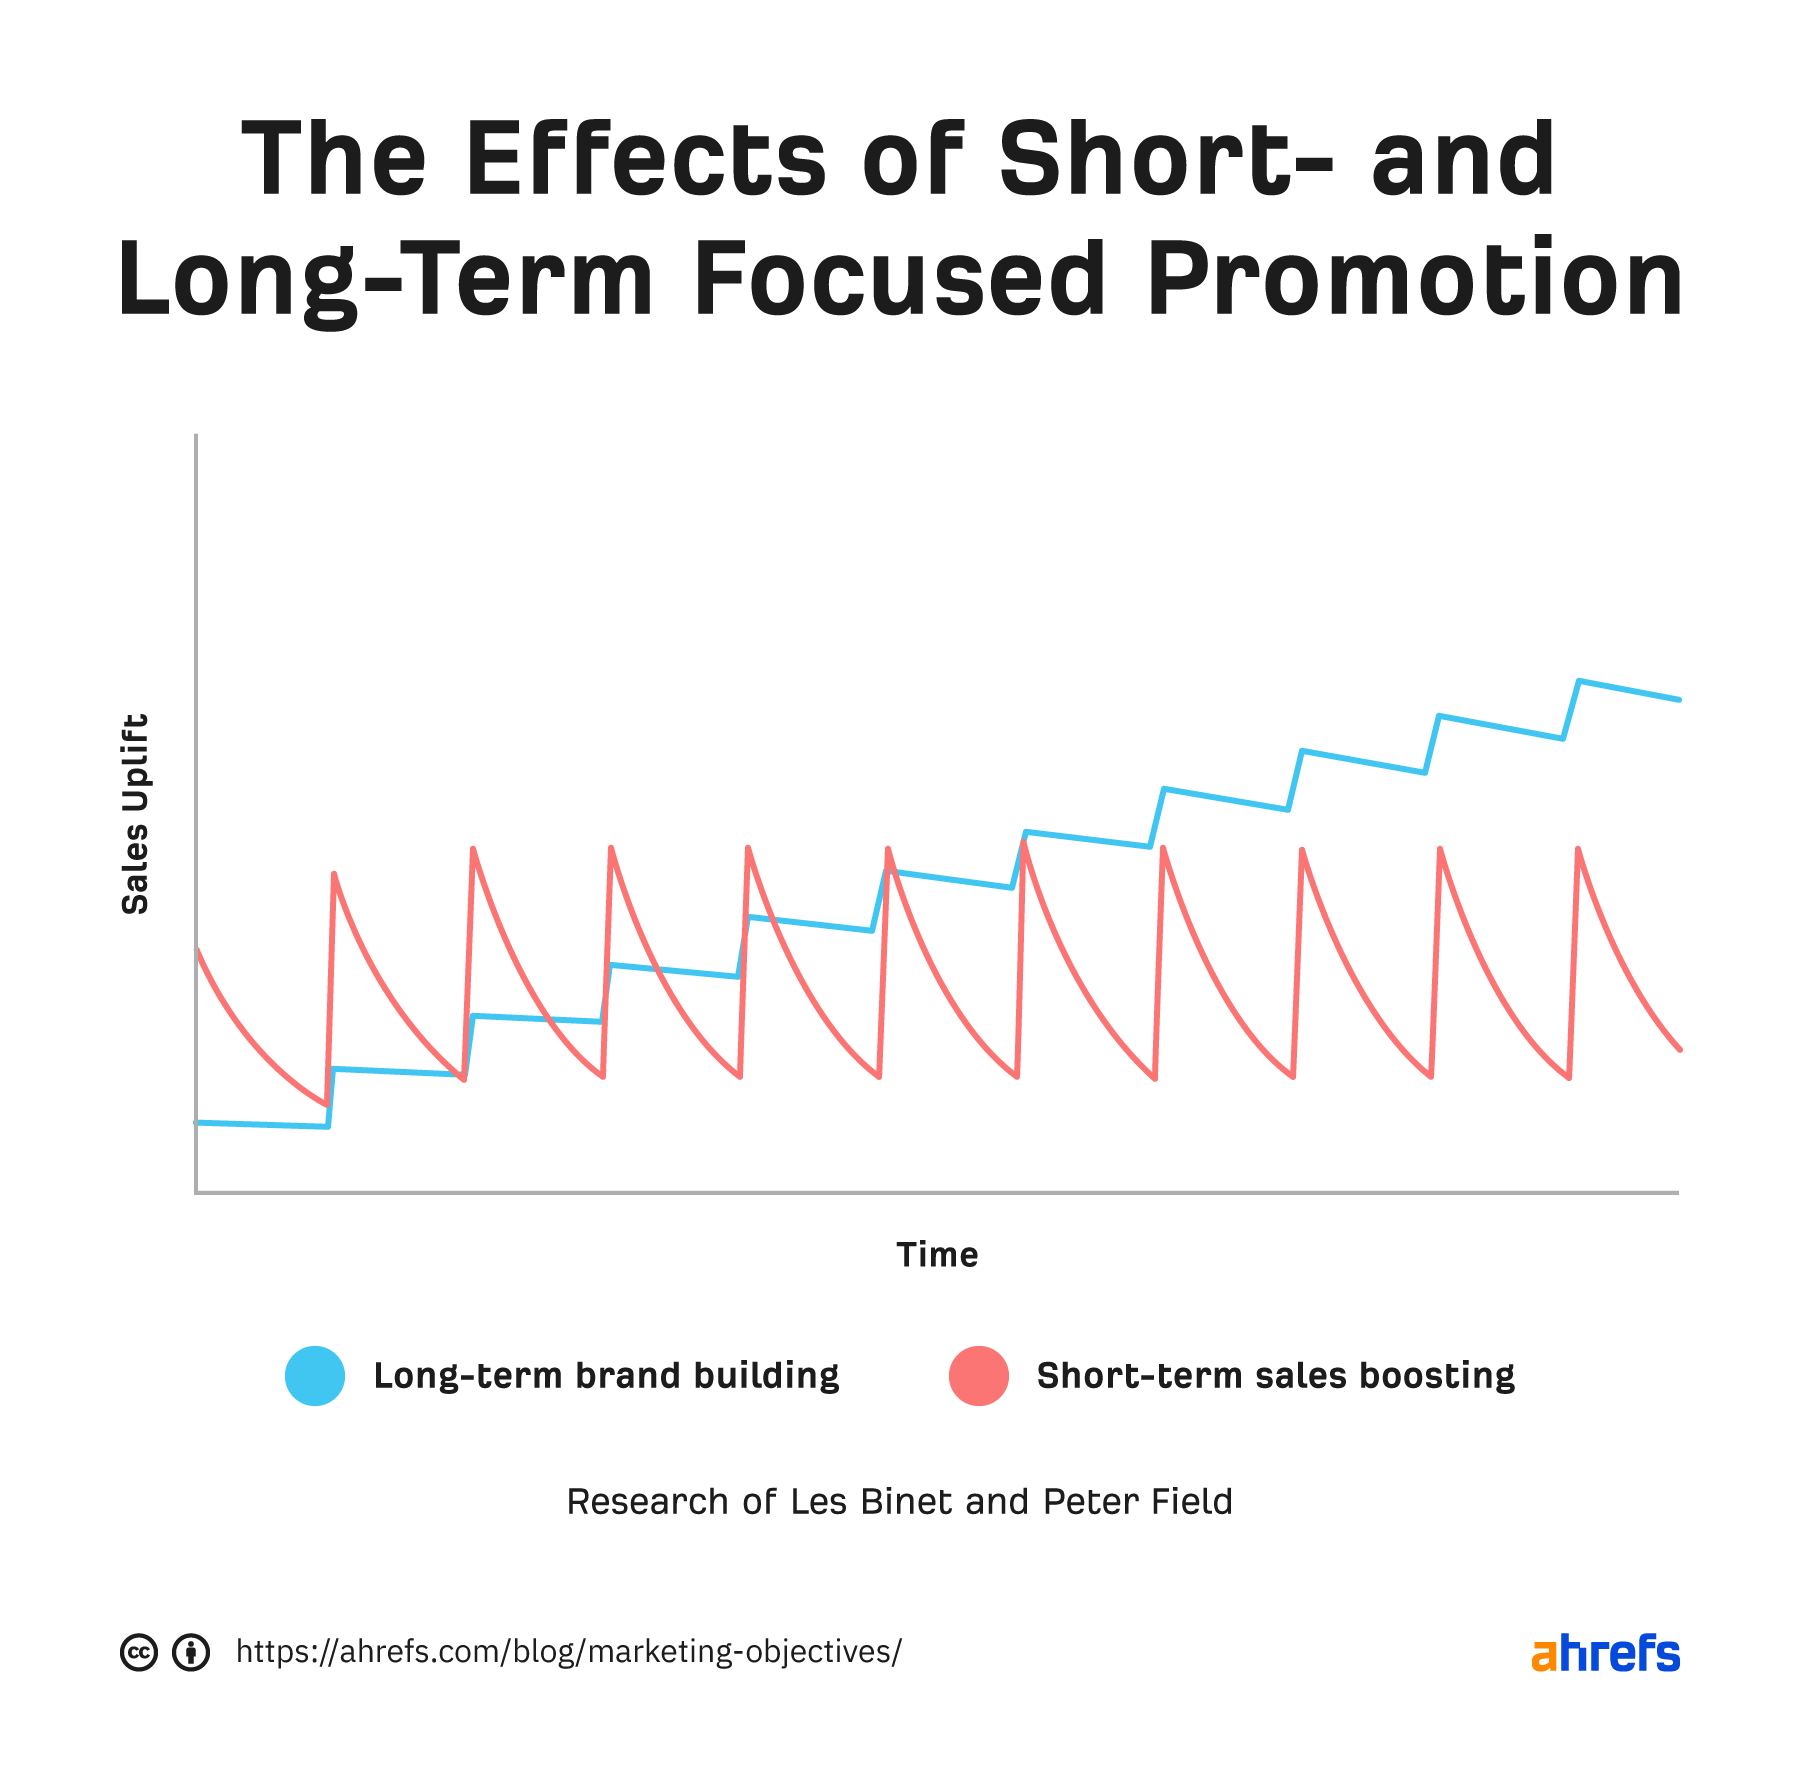 Line graph showing effects of short- and long-term focused promotion. Line for long-term generally goes up over time. Line for short-term goes up and down repeatedly over time